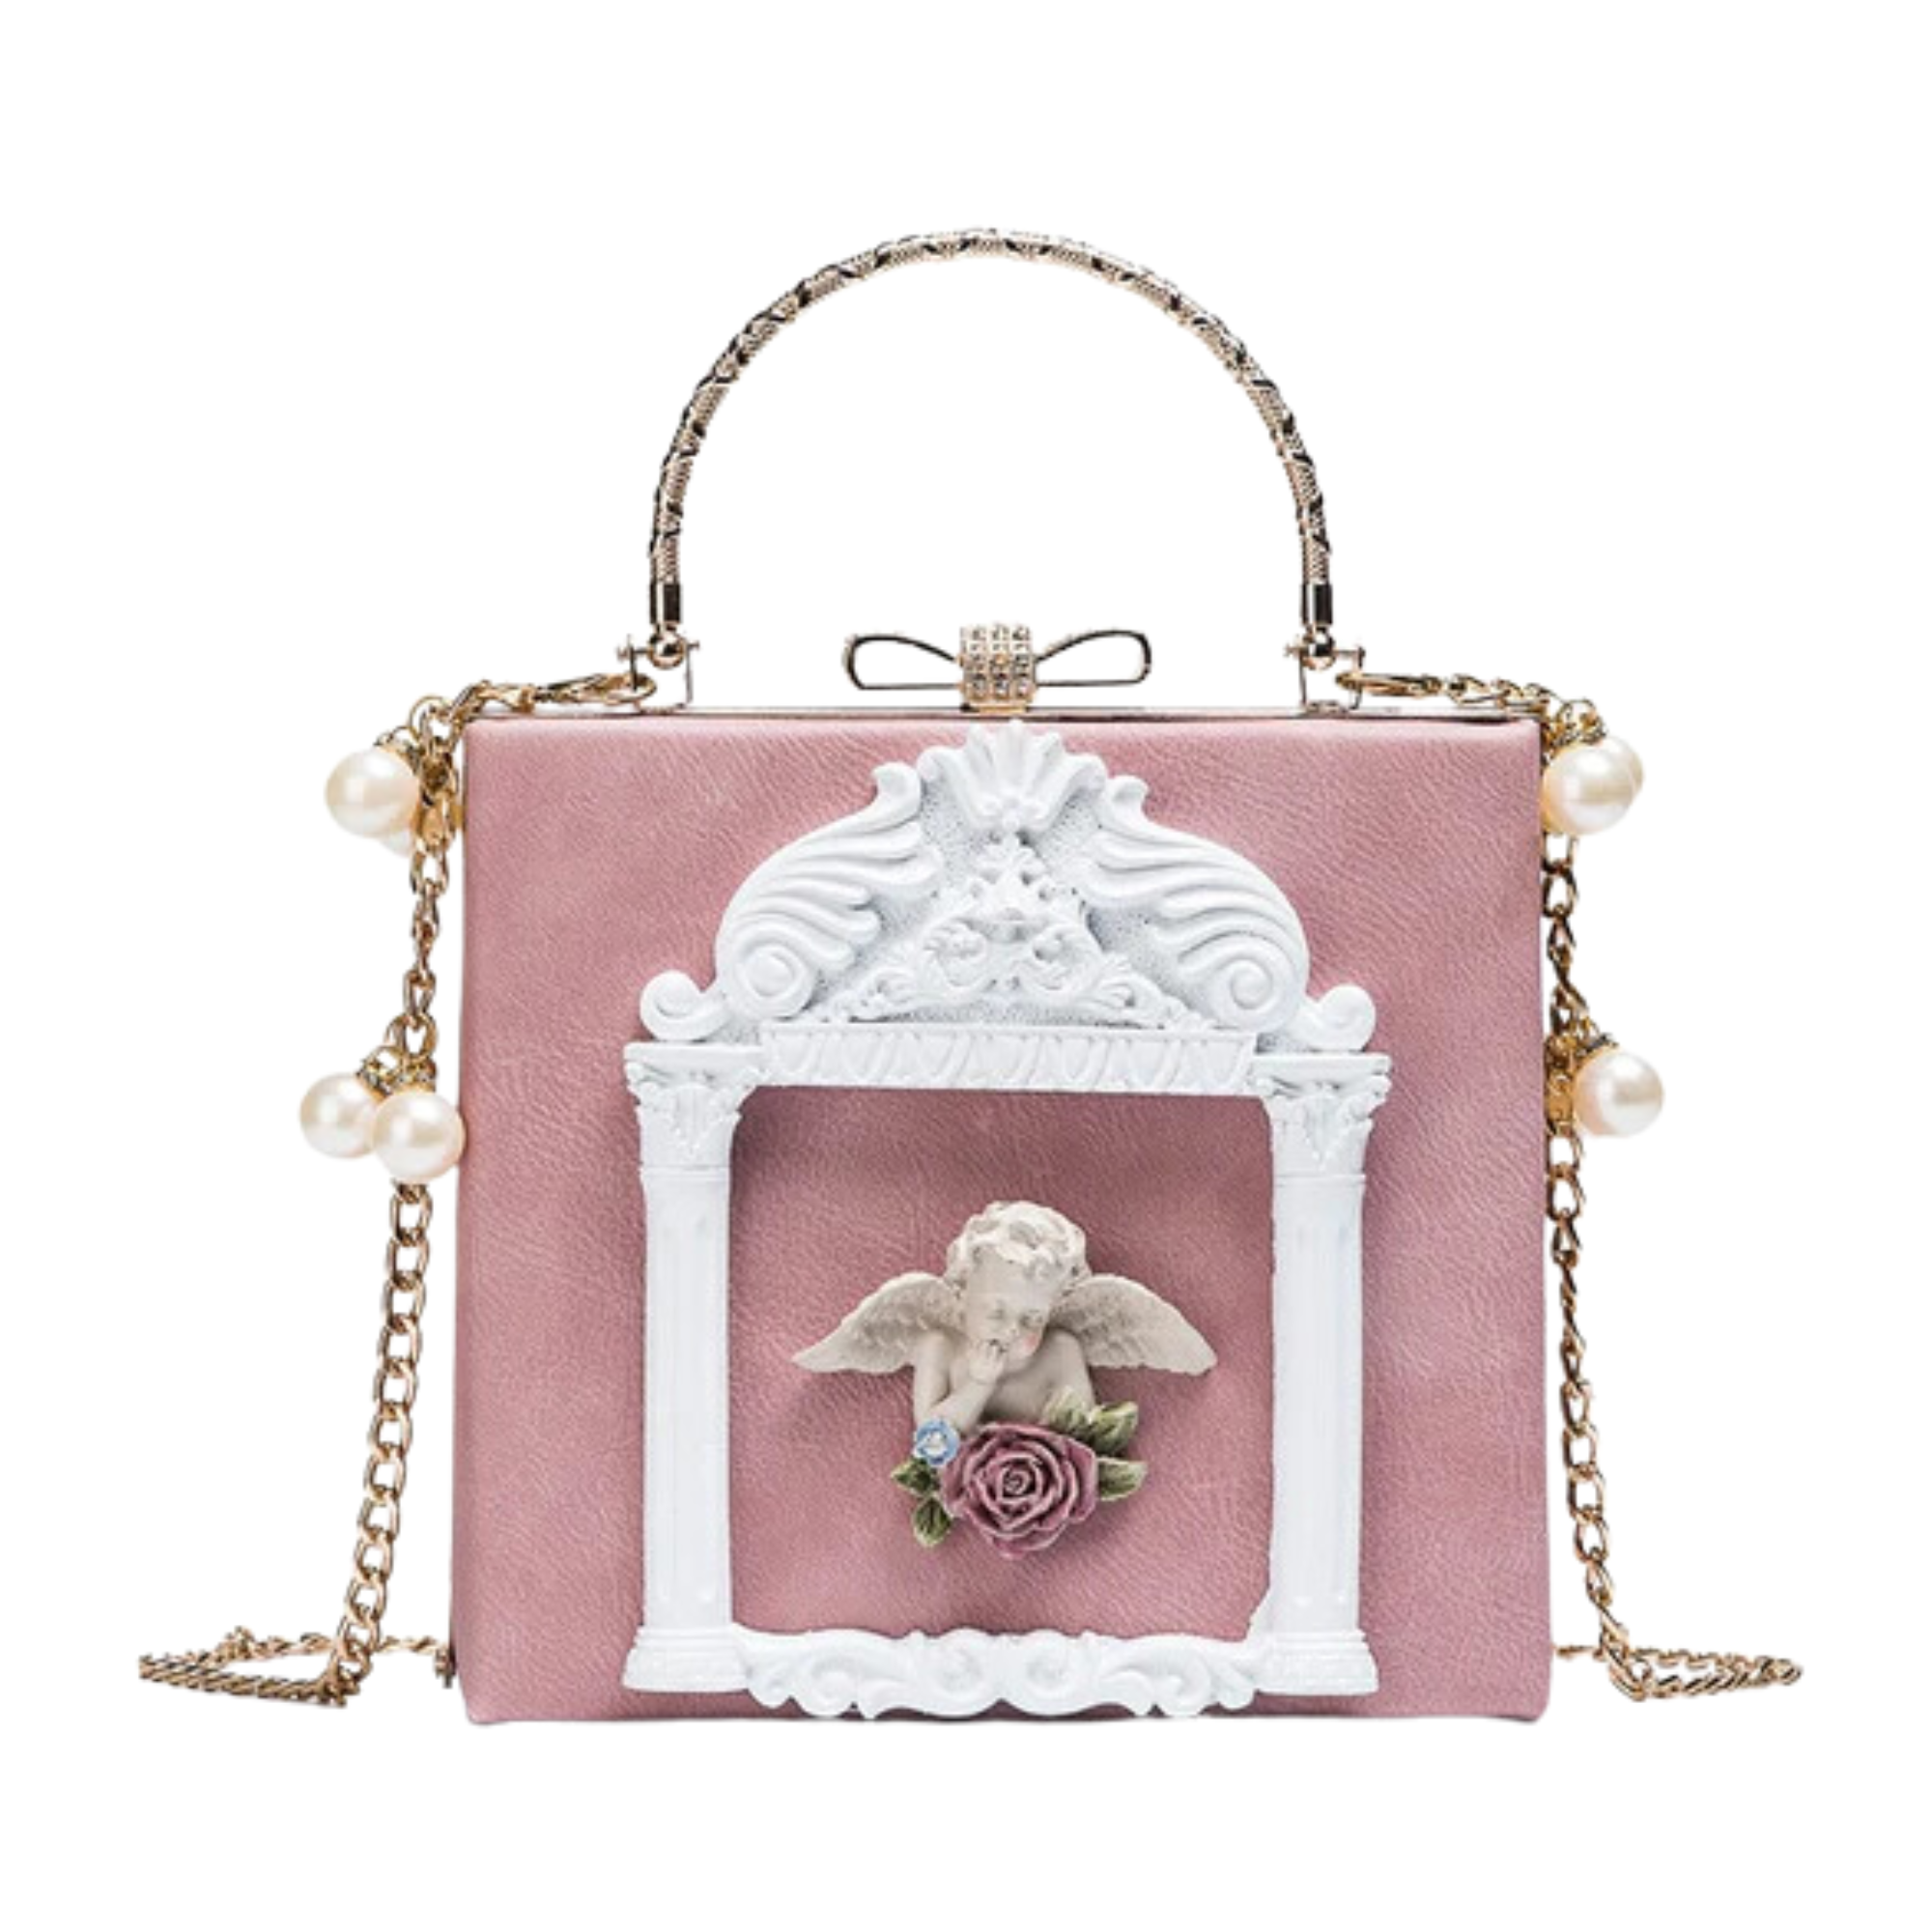 Angel Faux Leather Square Bag - Pre Order: Ships Feb 29